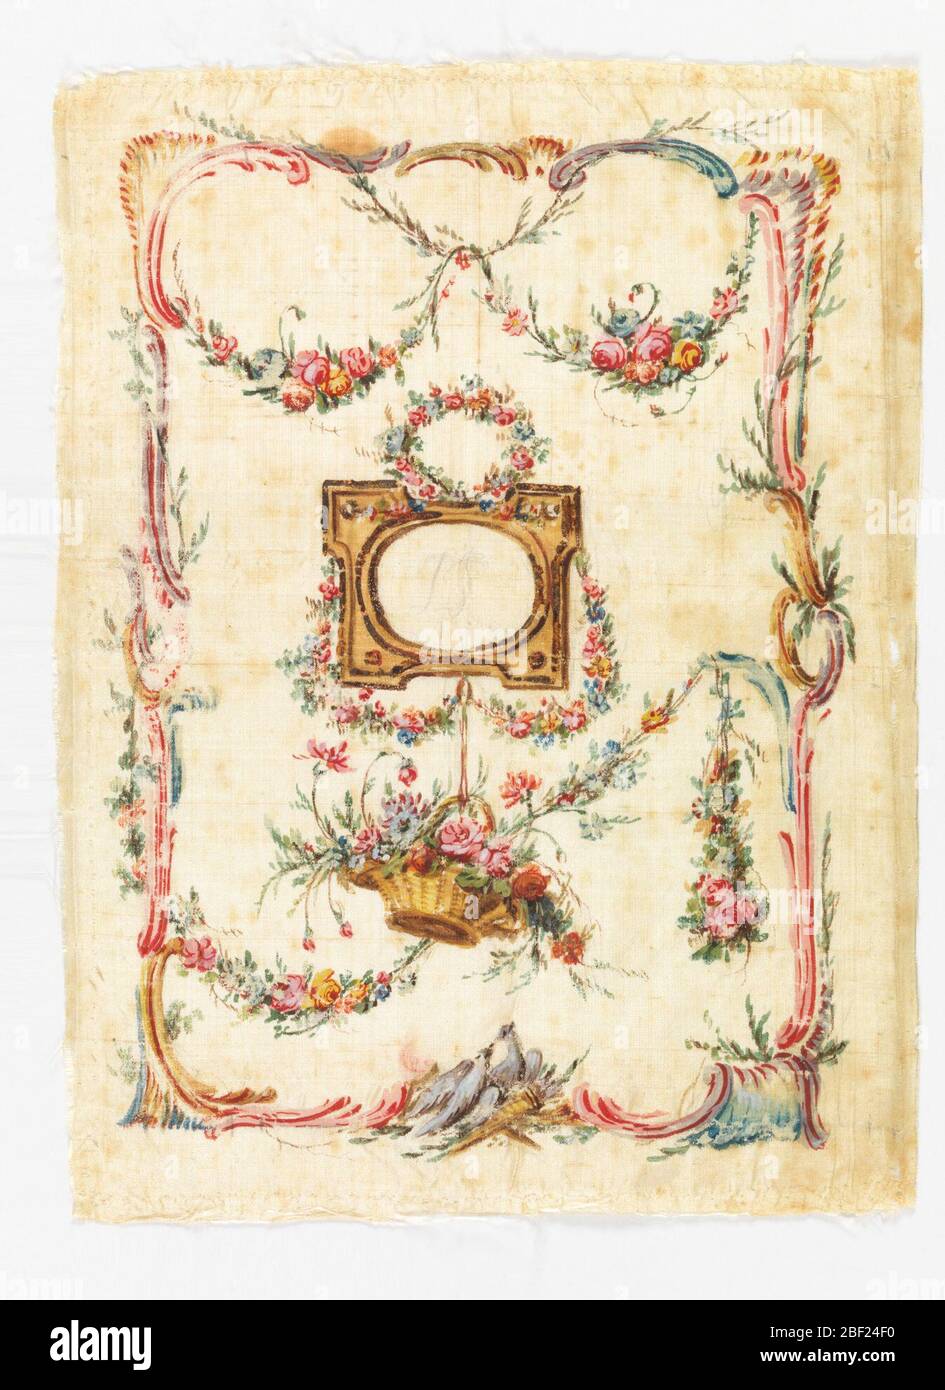 Unfinished pocketbook. Painted ivory silk taffeta panel for the sides of a pocketbook. Design has a frame with an oval opening (as for monogram) with a floral wreath above, and a basket of flowers dangling below. In a framework of swagged flower garlands. Stock Photo